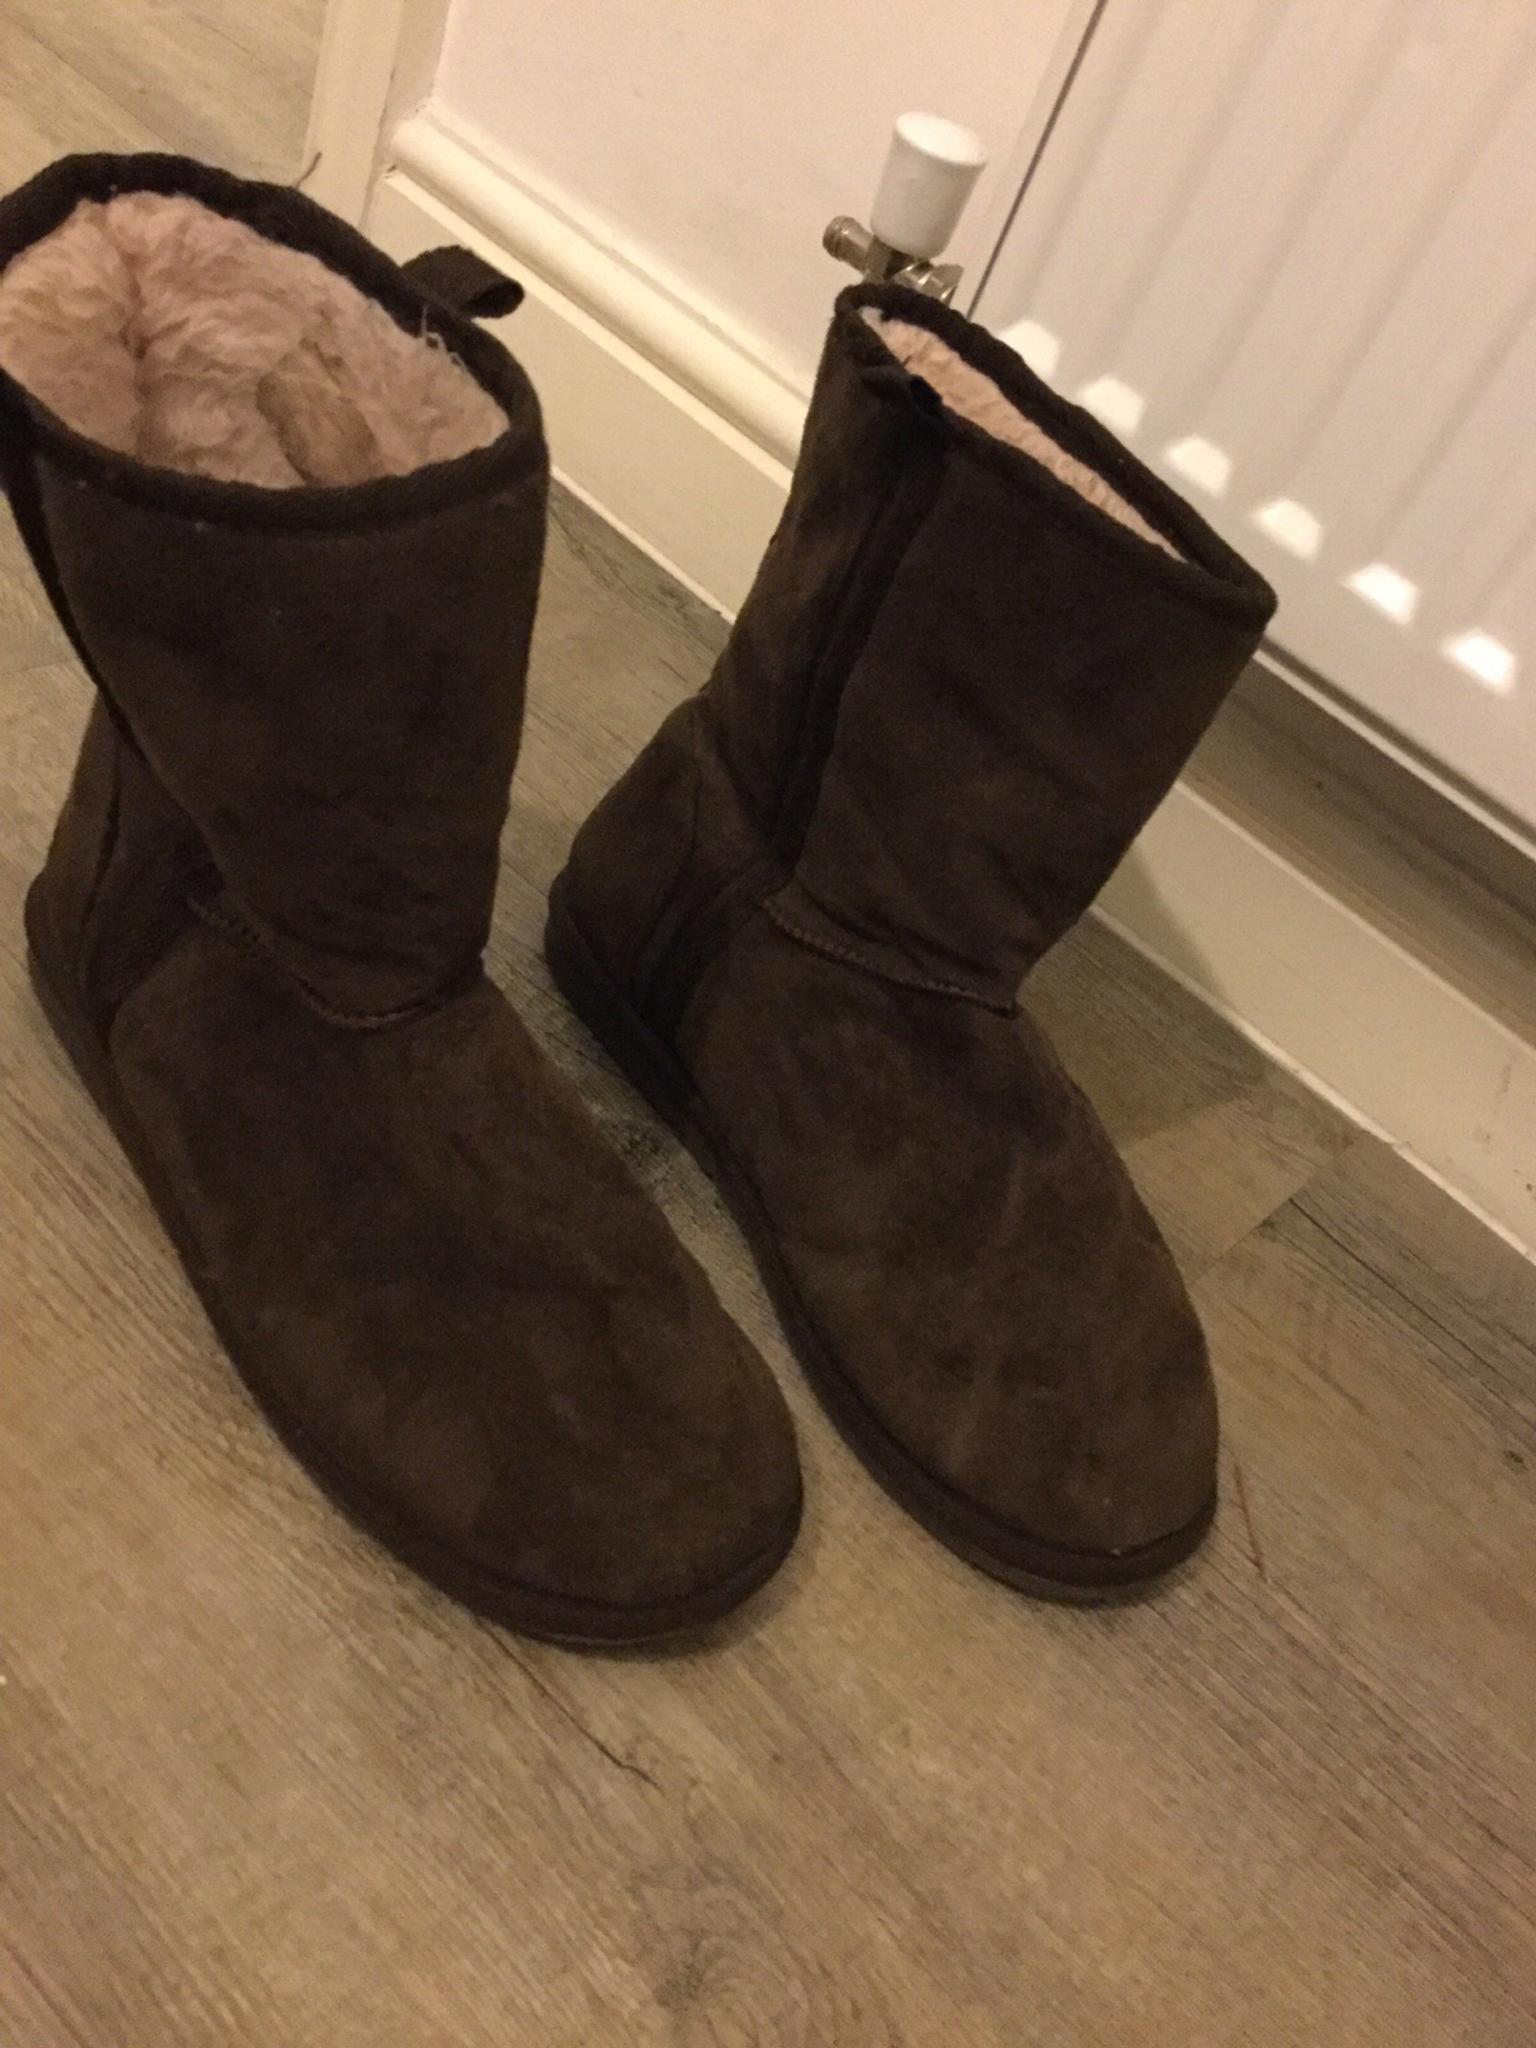 women in ugg boots